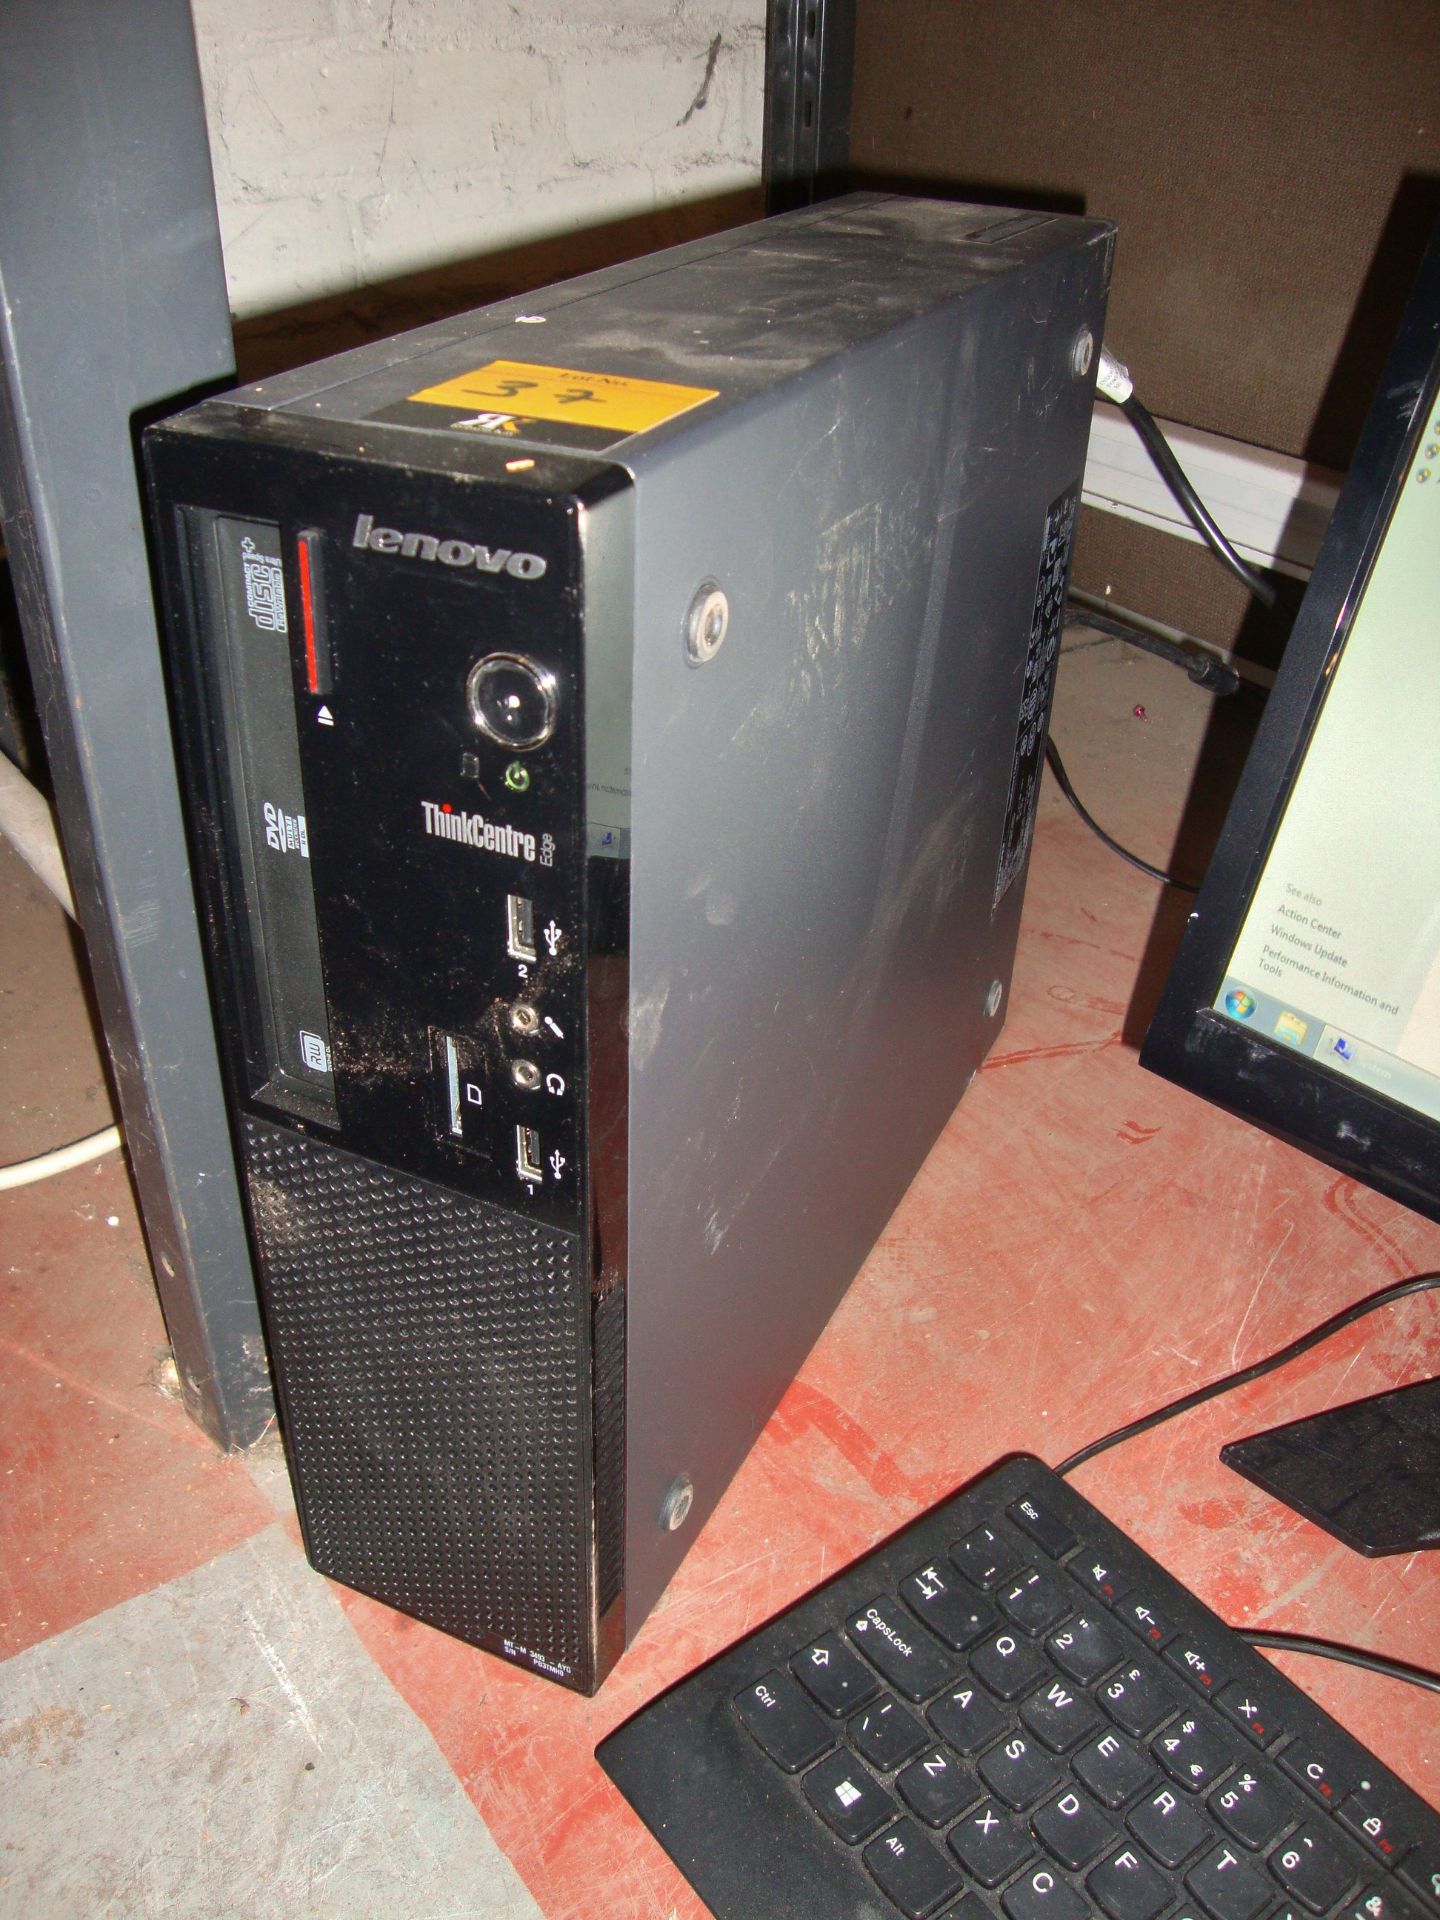 Lenovo desktop PC with Intel Core i3-3220@ 3.3GHz, 4Gb RAM, 500Gb hard drive, keyboard and Viewsonic - Image 2 of 4